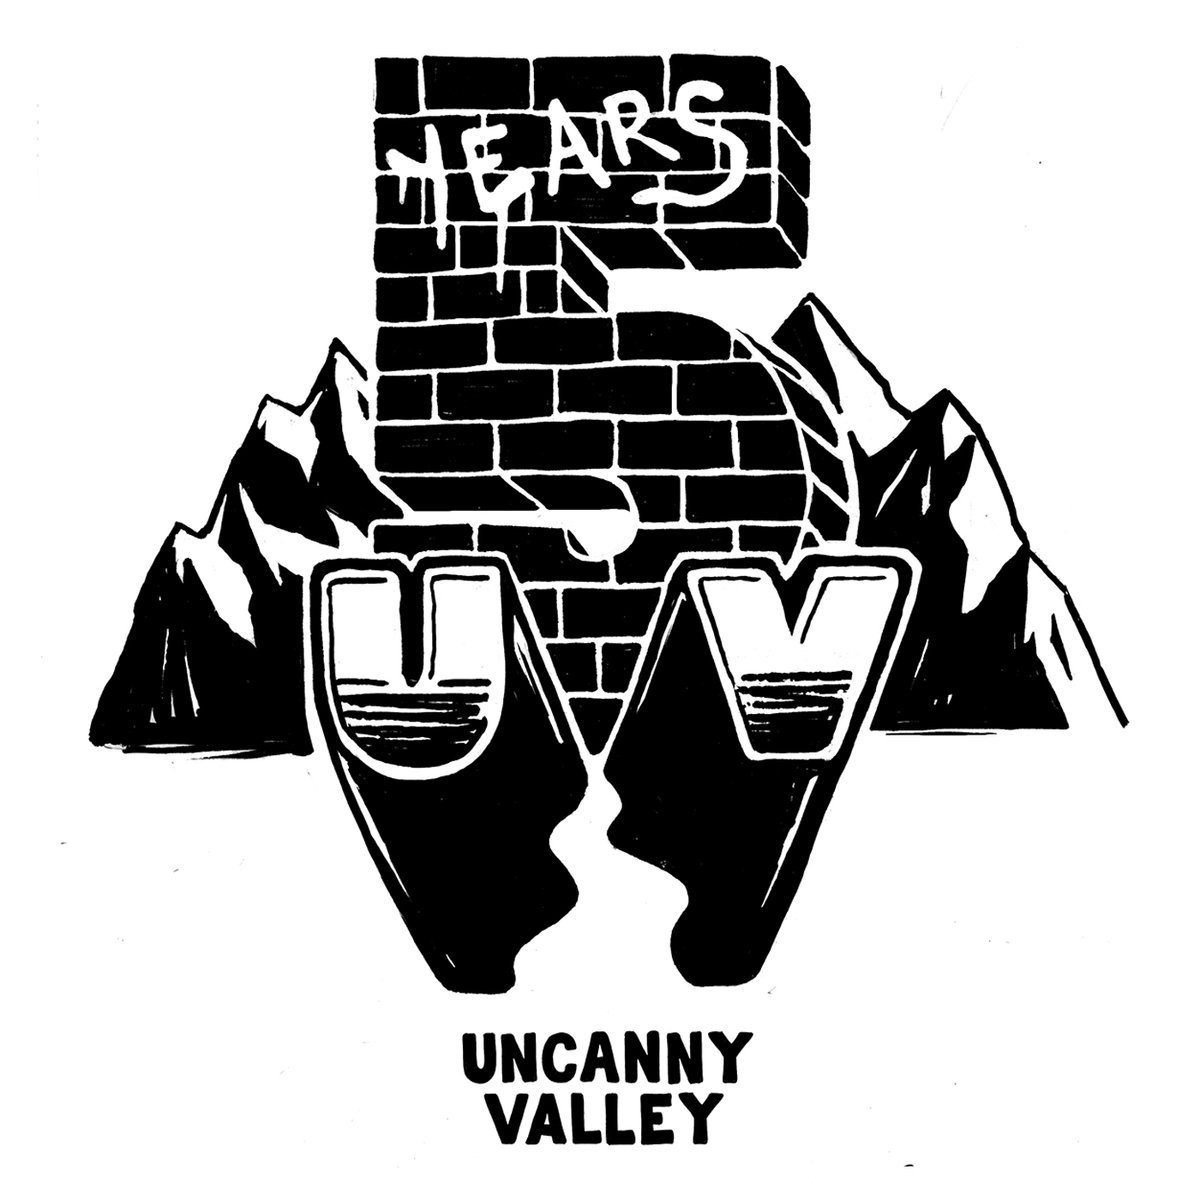 Bandcamp pick of the week: Uncanny Valley: Five Years On Parole - what happened 